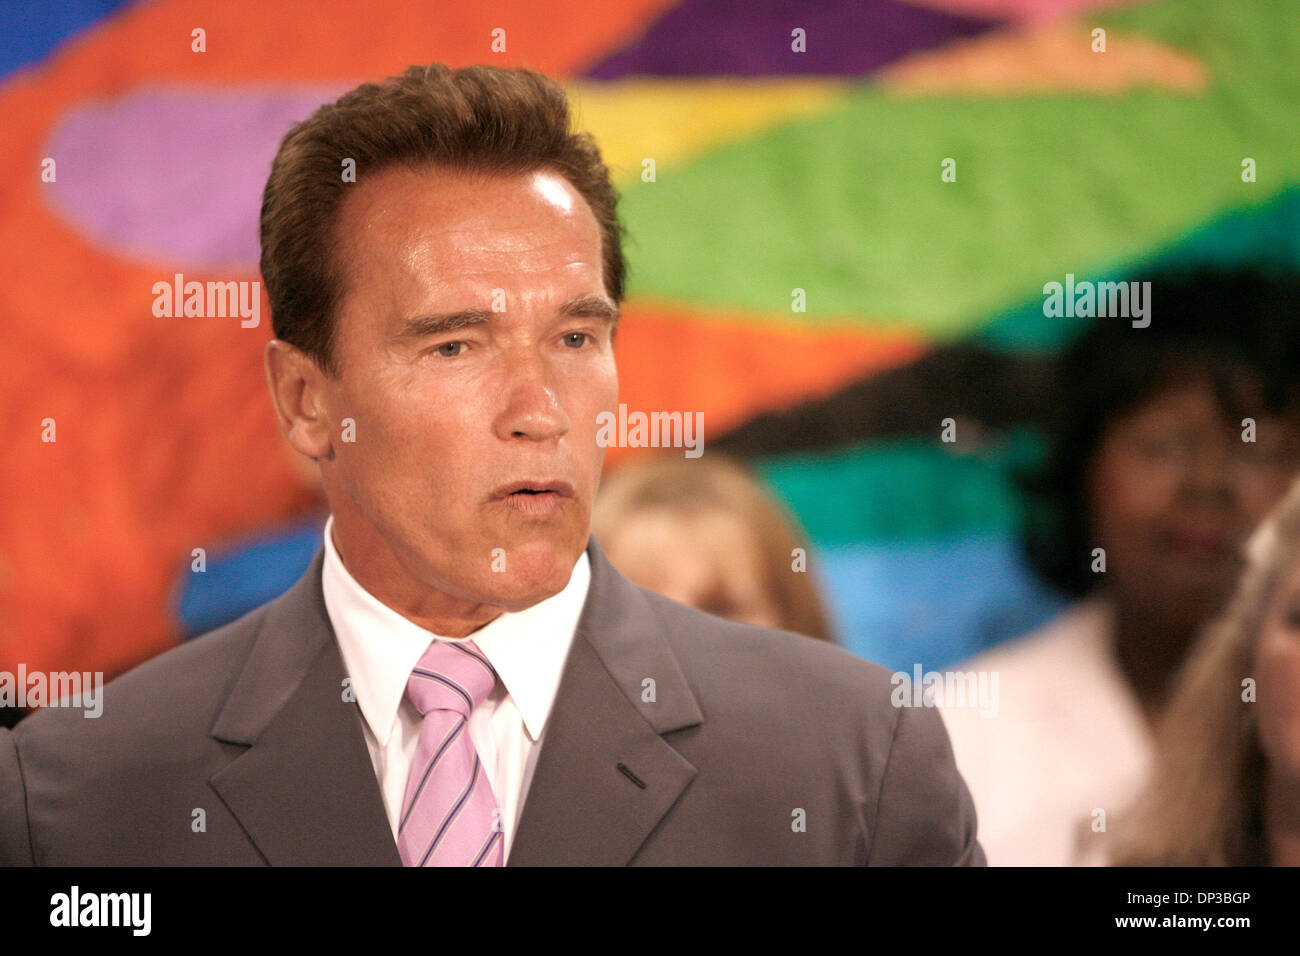 Jun 27, 2006; Oakland, CA, USA; California Governor ARNOLD SCHWARZENEGGER announced his sponsorship of a crime victims bill and announces the appointment of a new Crime Victim Advocate, Susan Fisher. The crime victims bill will assign resources to help victims overcome the hardships caused by criminal acts.  As an added piece of news, Schwarzenegger also announced the approval of n Stock Photo